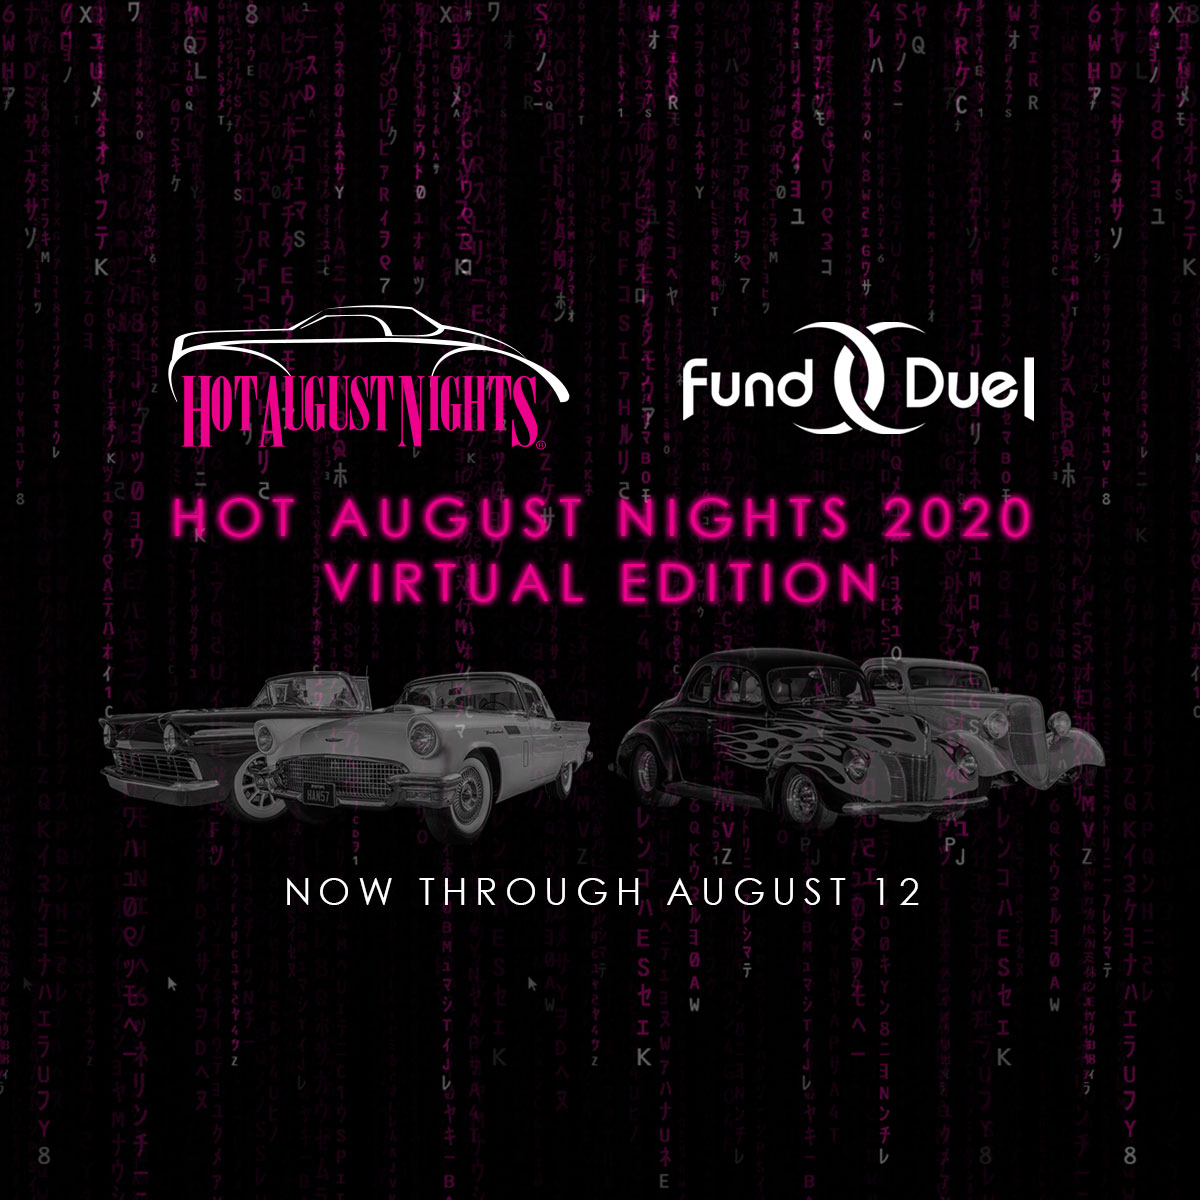 Hot August Nights Virtual Edition 2020
Donate to a team or scroll down the team page and donate to your favorite photo/video
Funds go to Hot August Nights & Hot August Nights Foundation for at-risk youth 